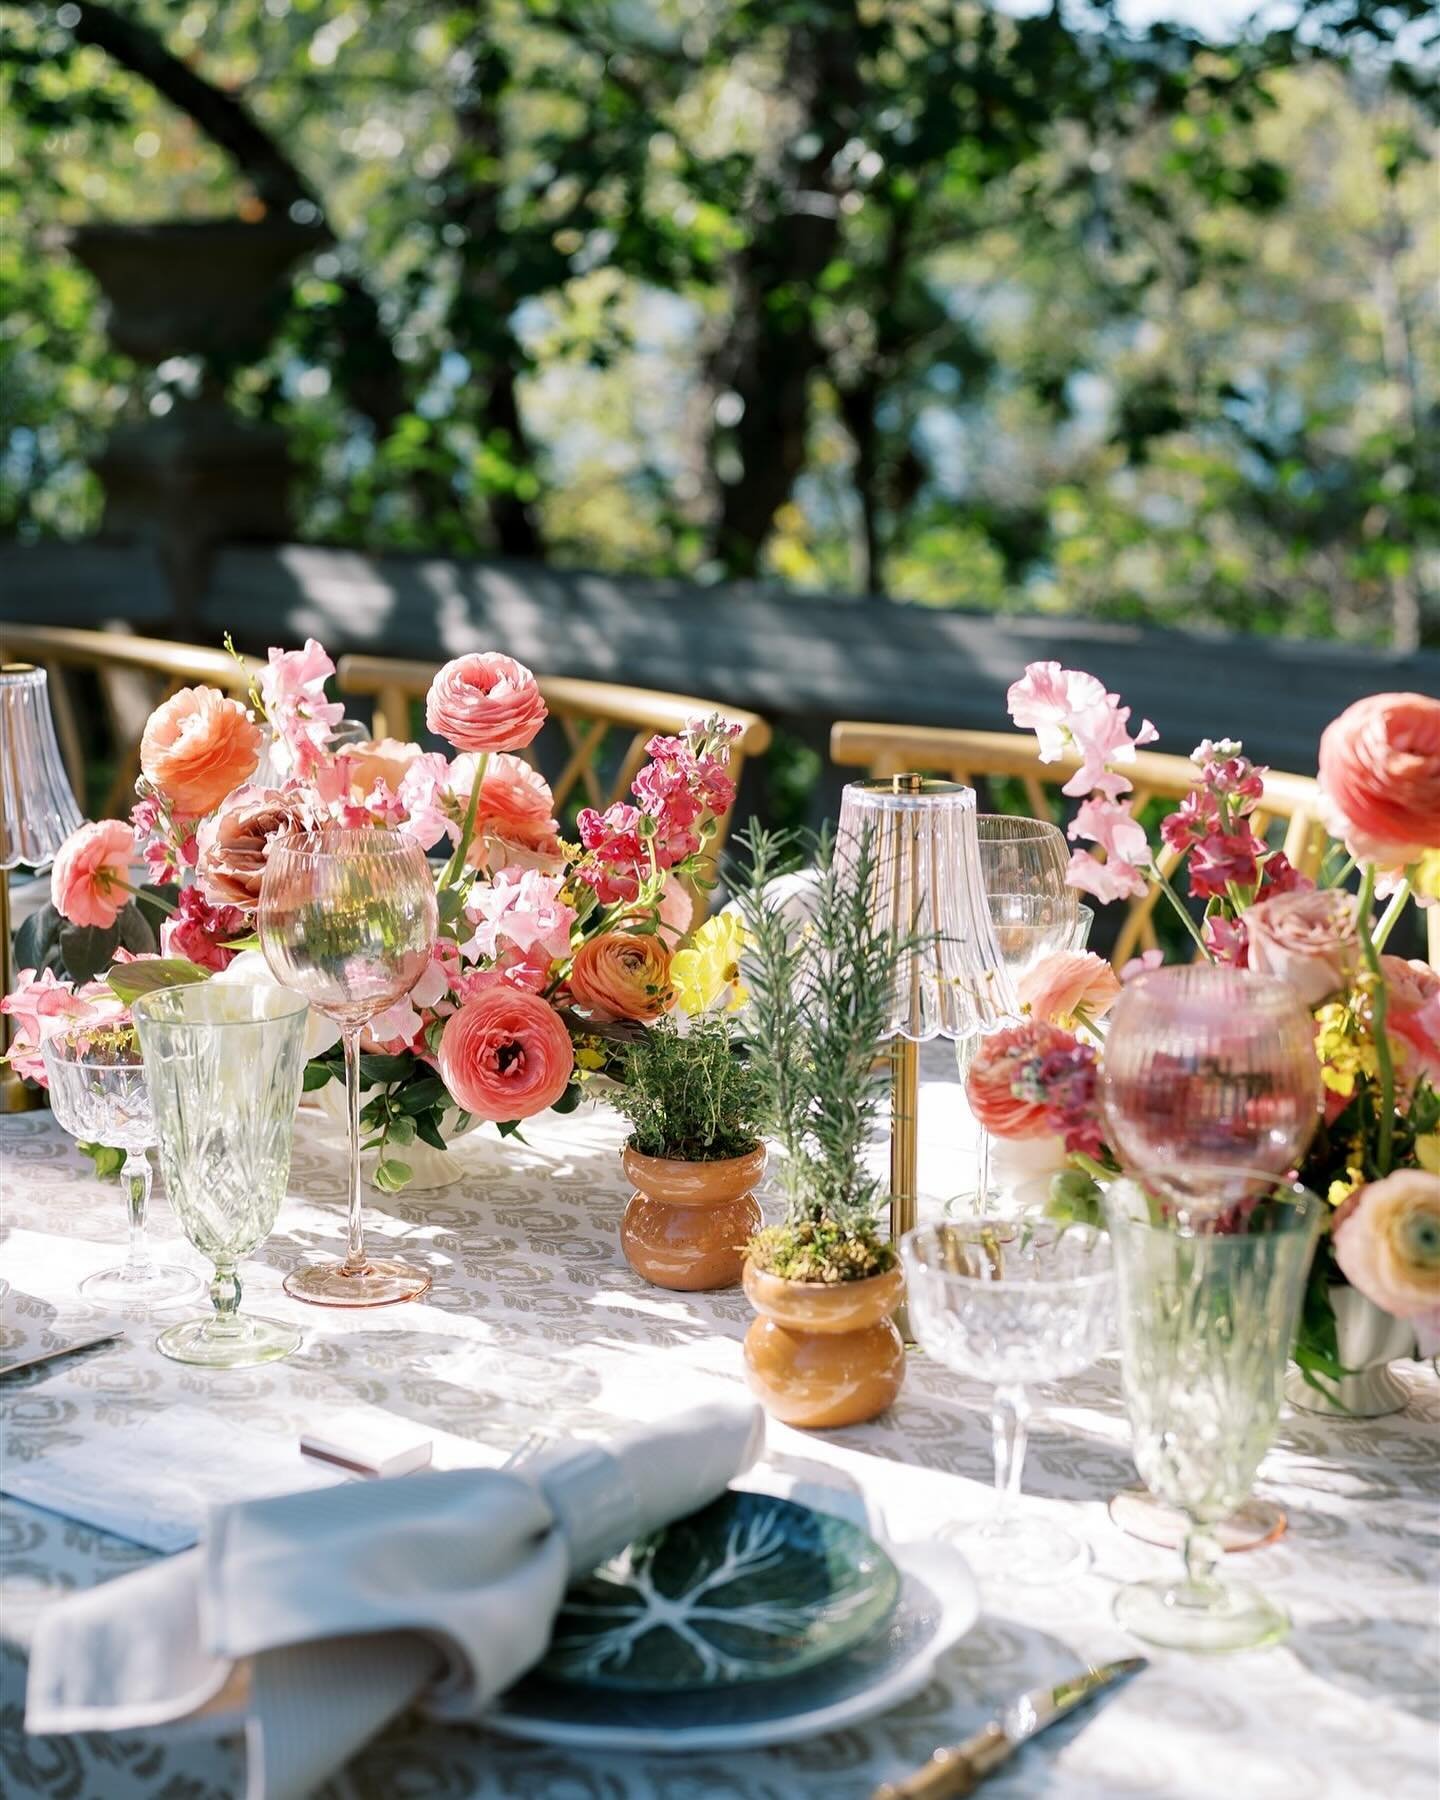 Taylor of @bettsandcoevents dreamt up this stunning spring table design that @bymaggiepeterson sprinkled with her lovely blooms! Laguna Gloria is forever a top choice for romantic European wedding vibes and dining al fresco with your guests. 

///

#